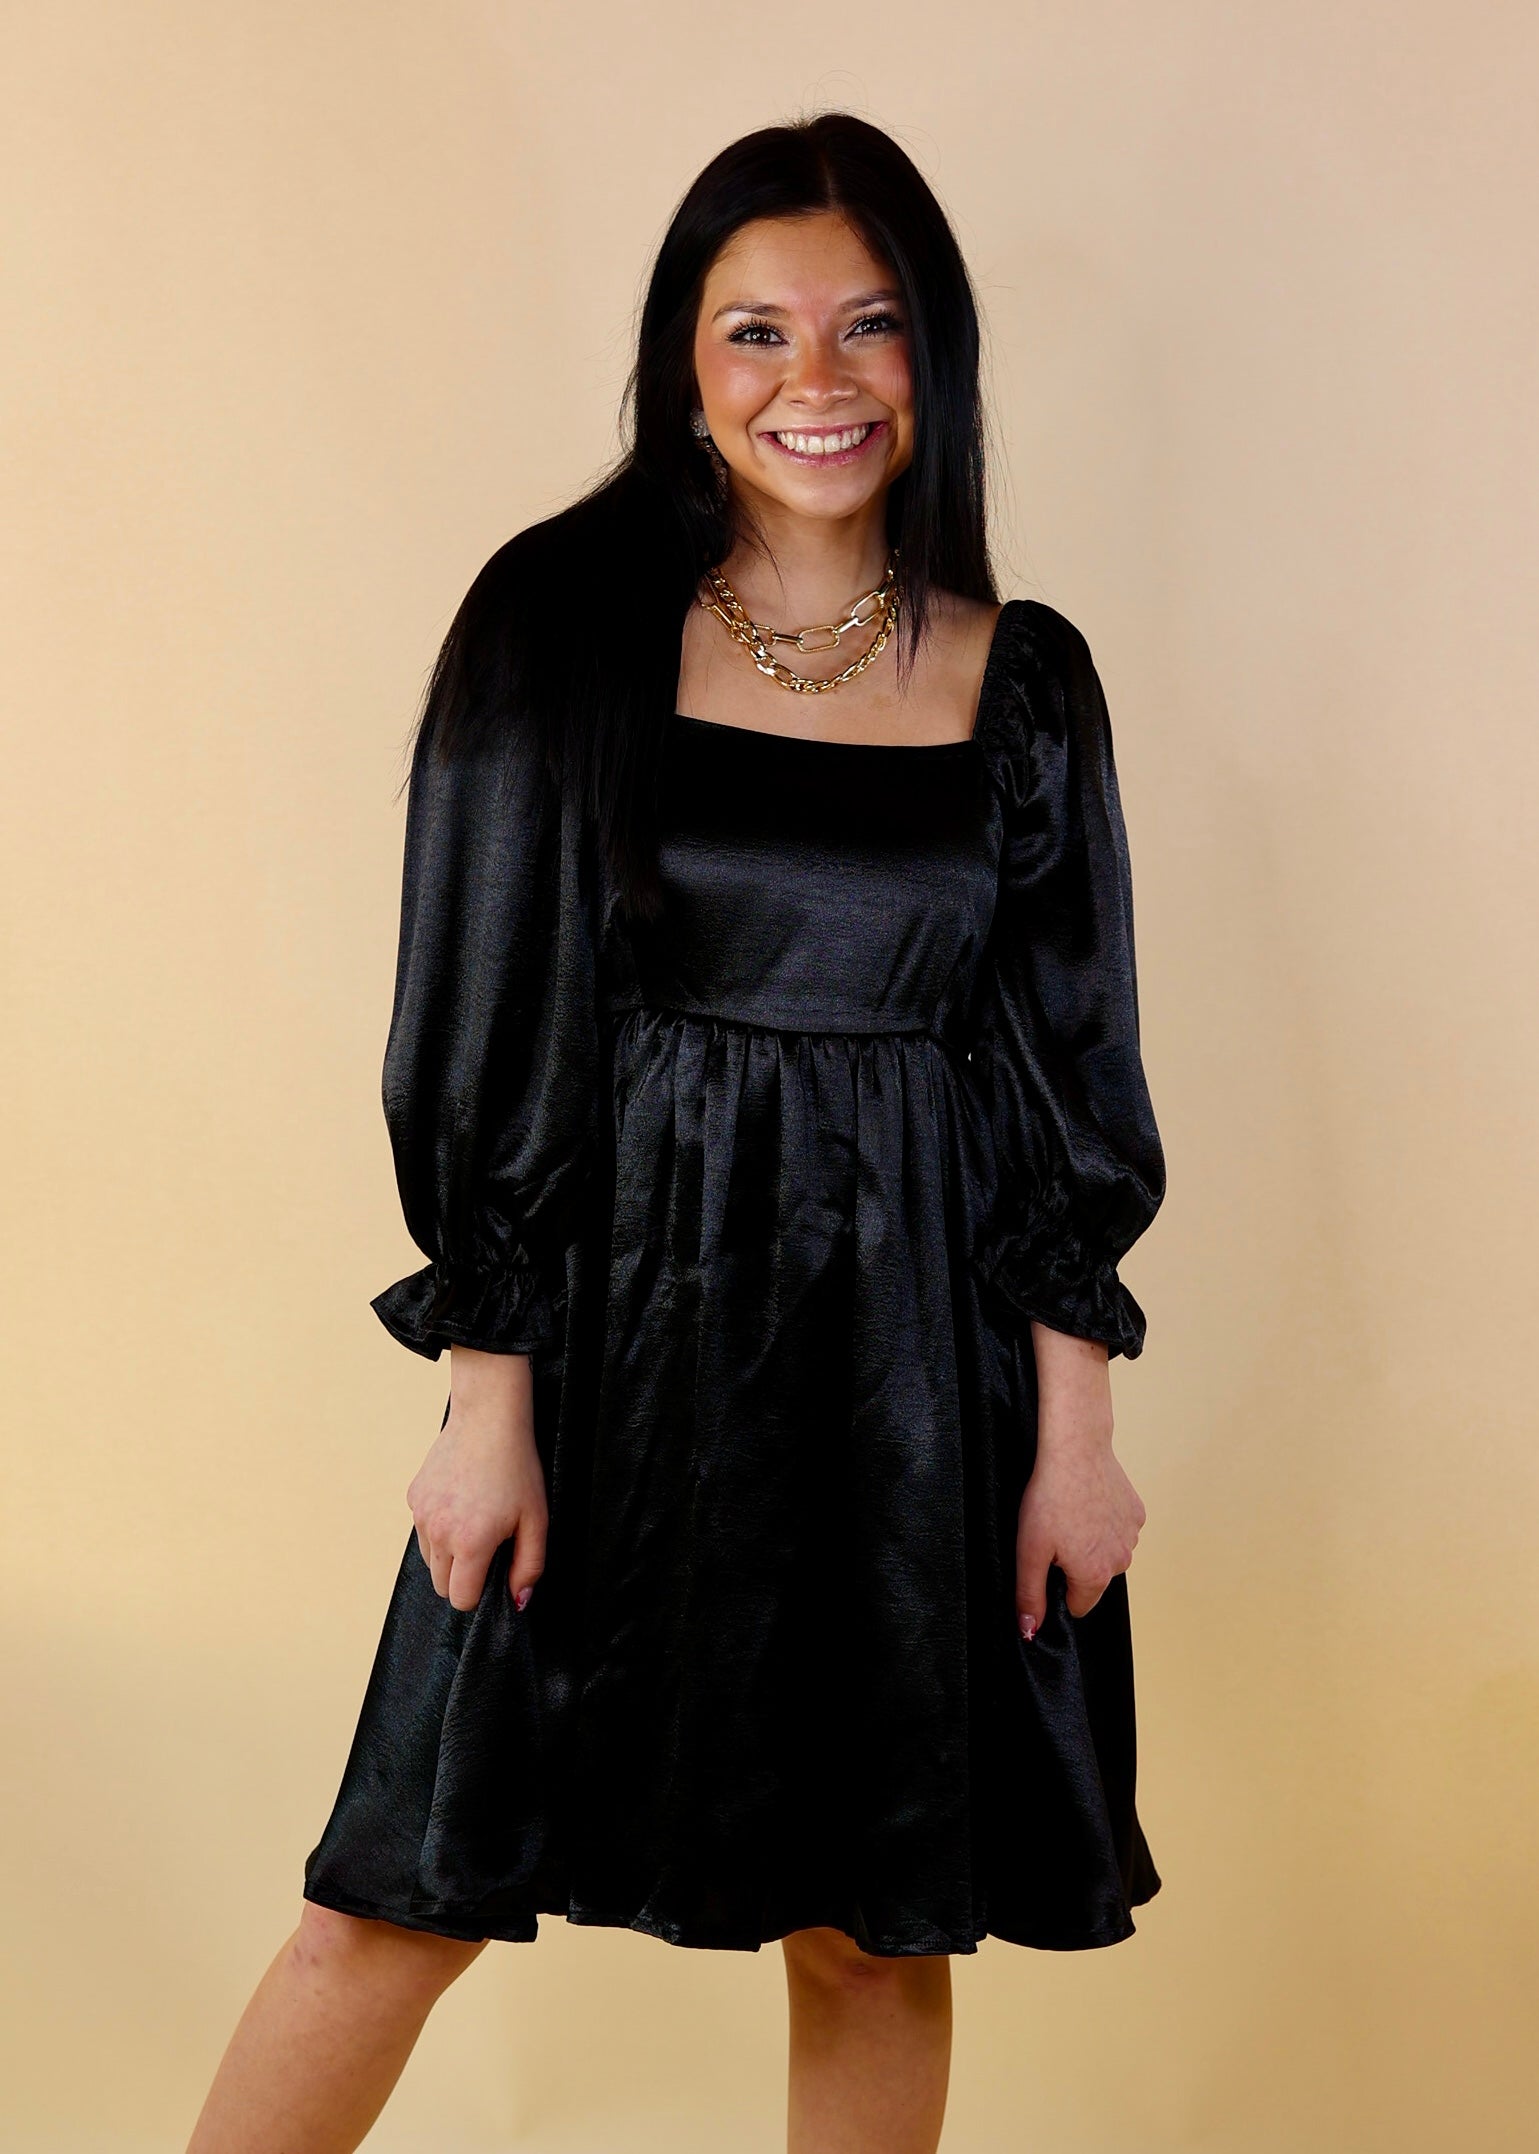 Feeling Fine Satin Babydoll Dress with 3/4 Sleeves in Black - Giddy Up Glamour Boutique